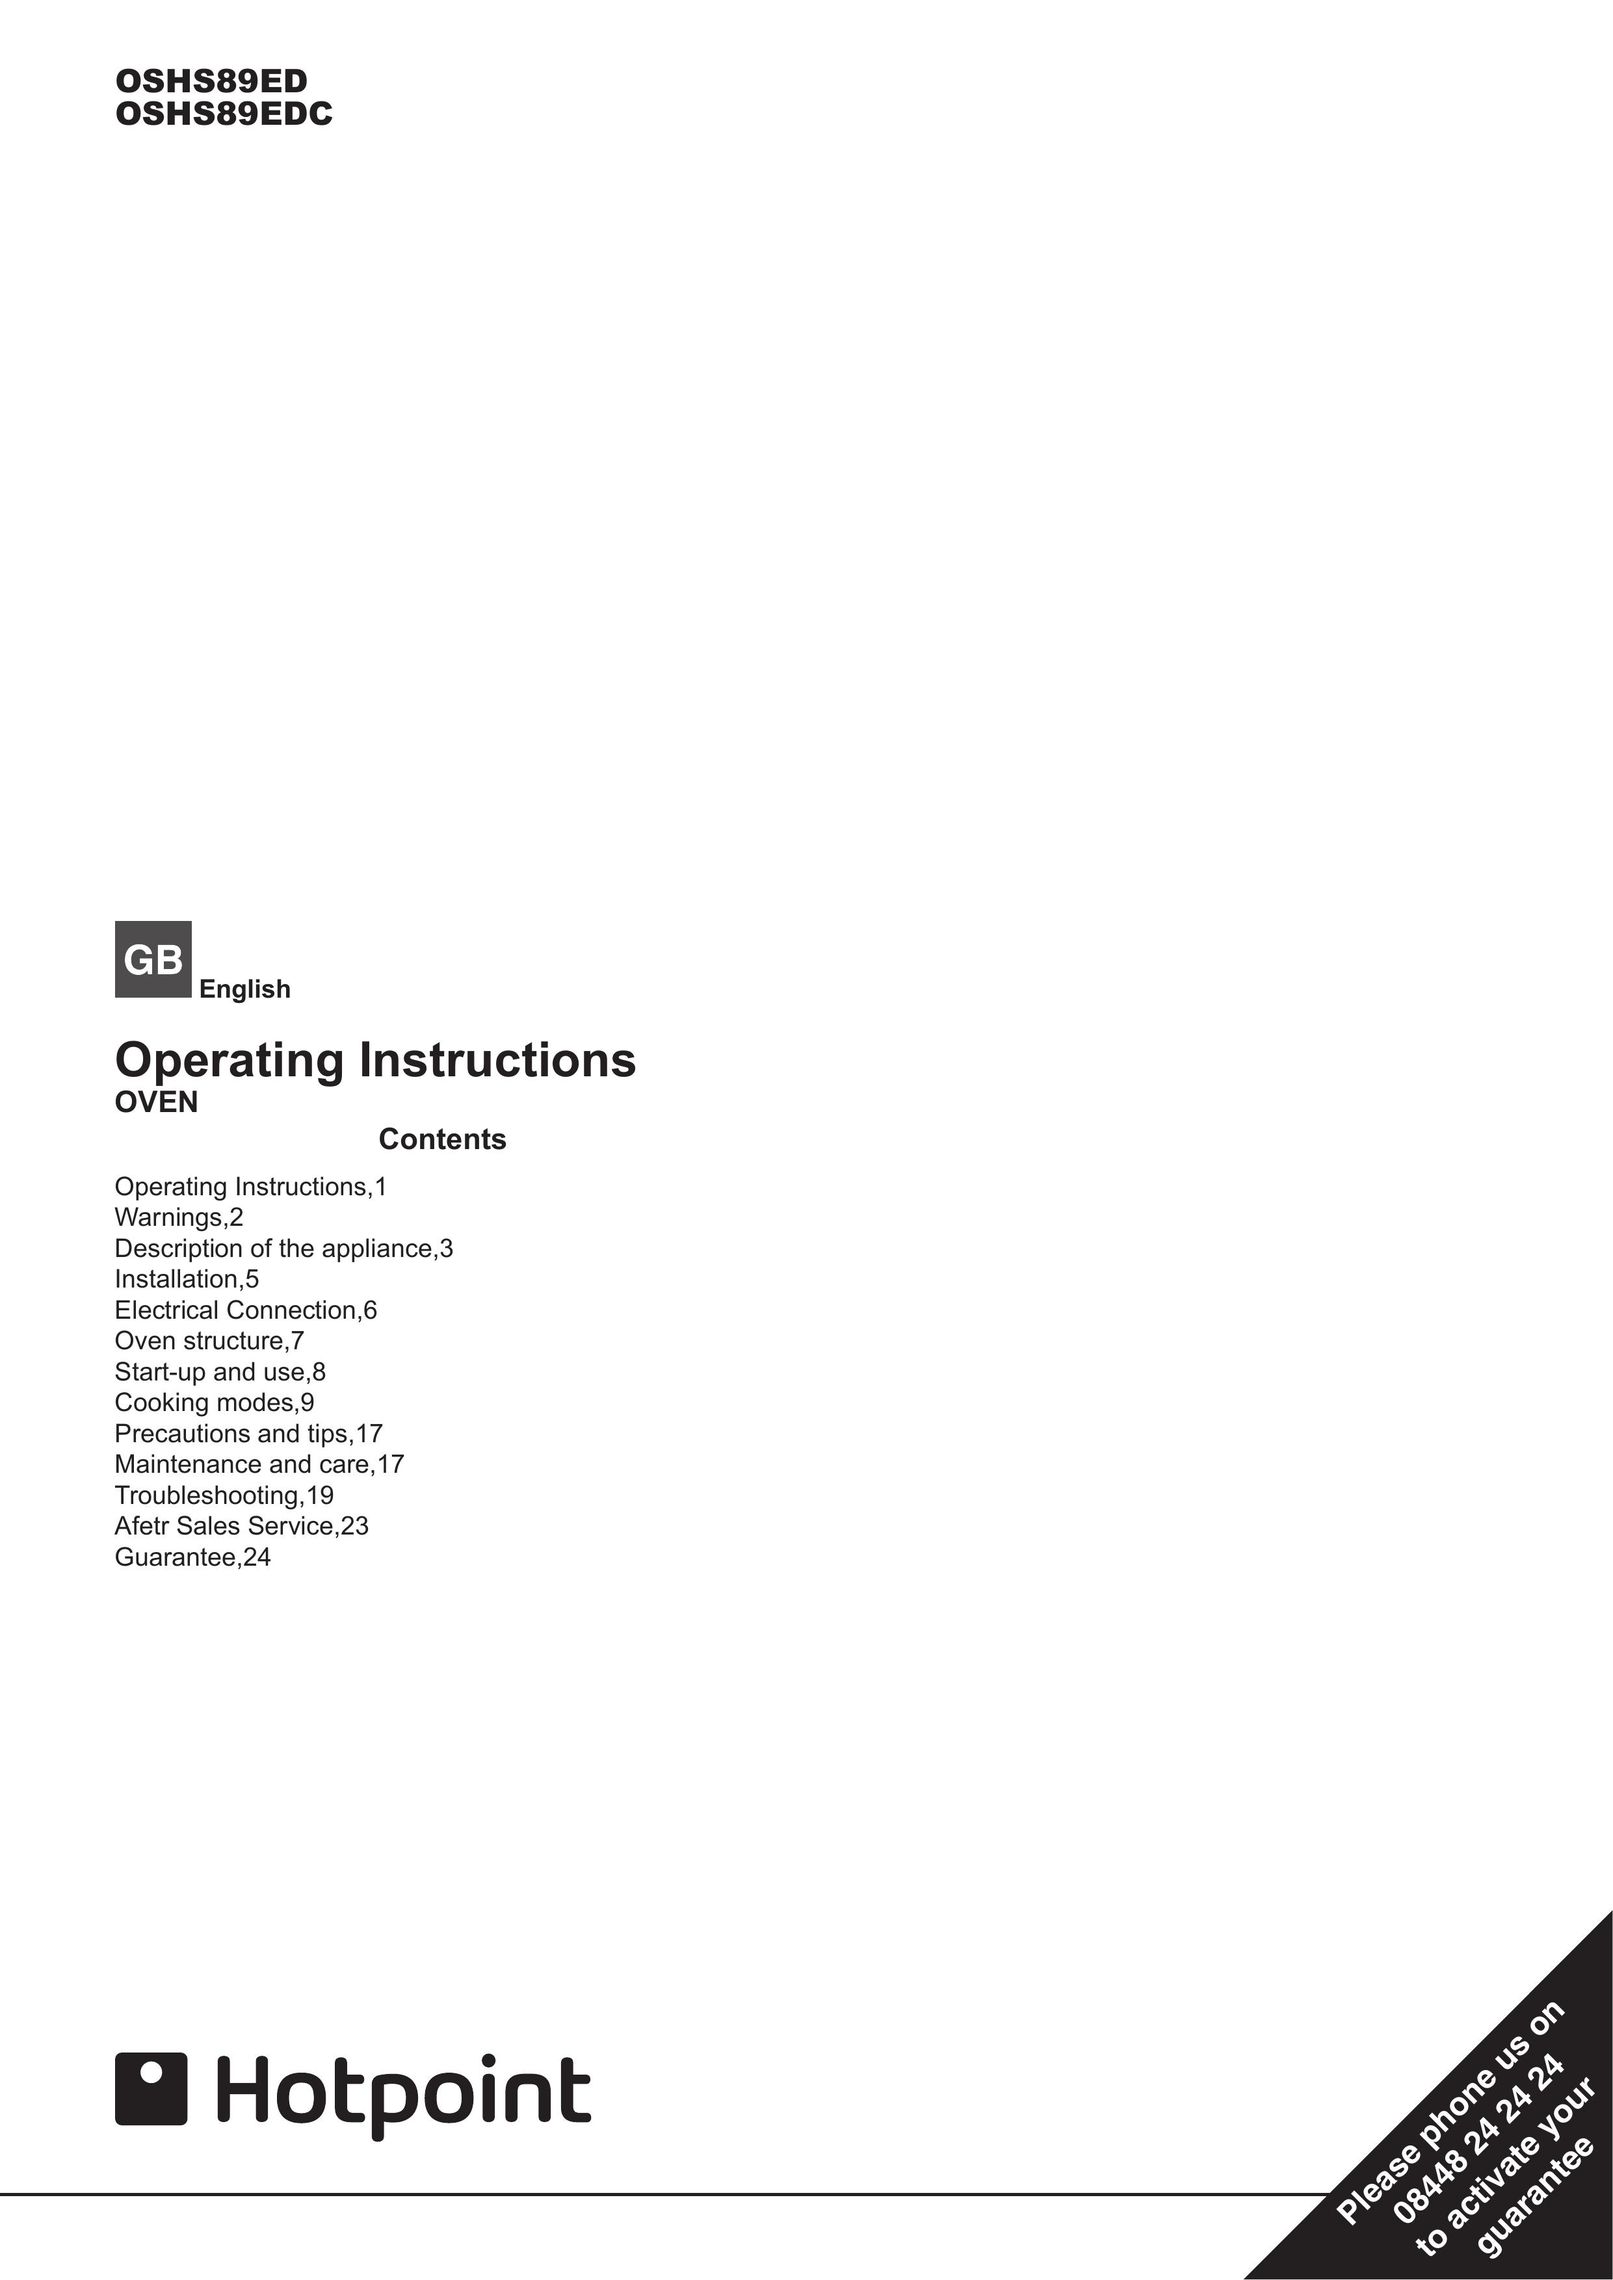 Hotpoint OSHS89EDC Oven Accessories User Manual